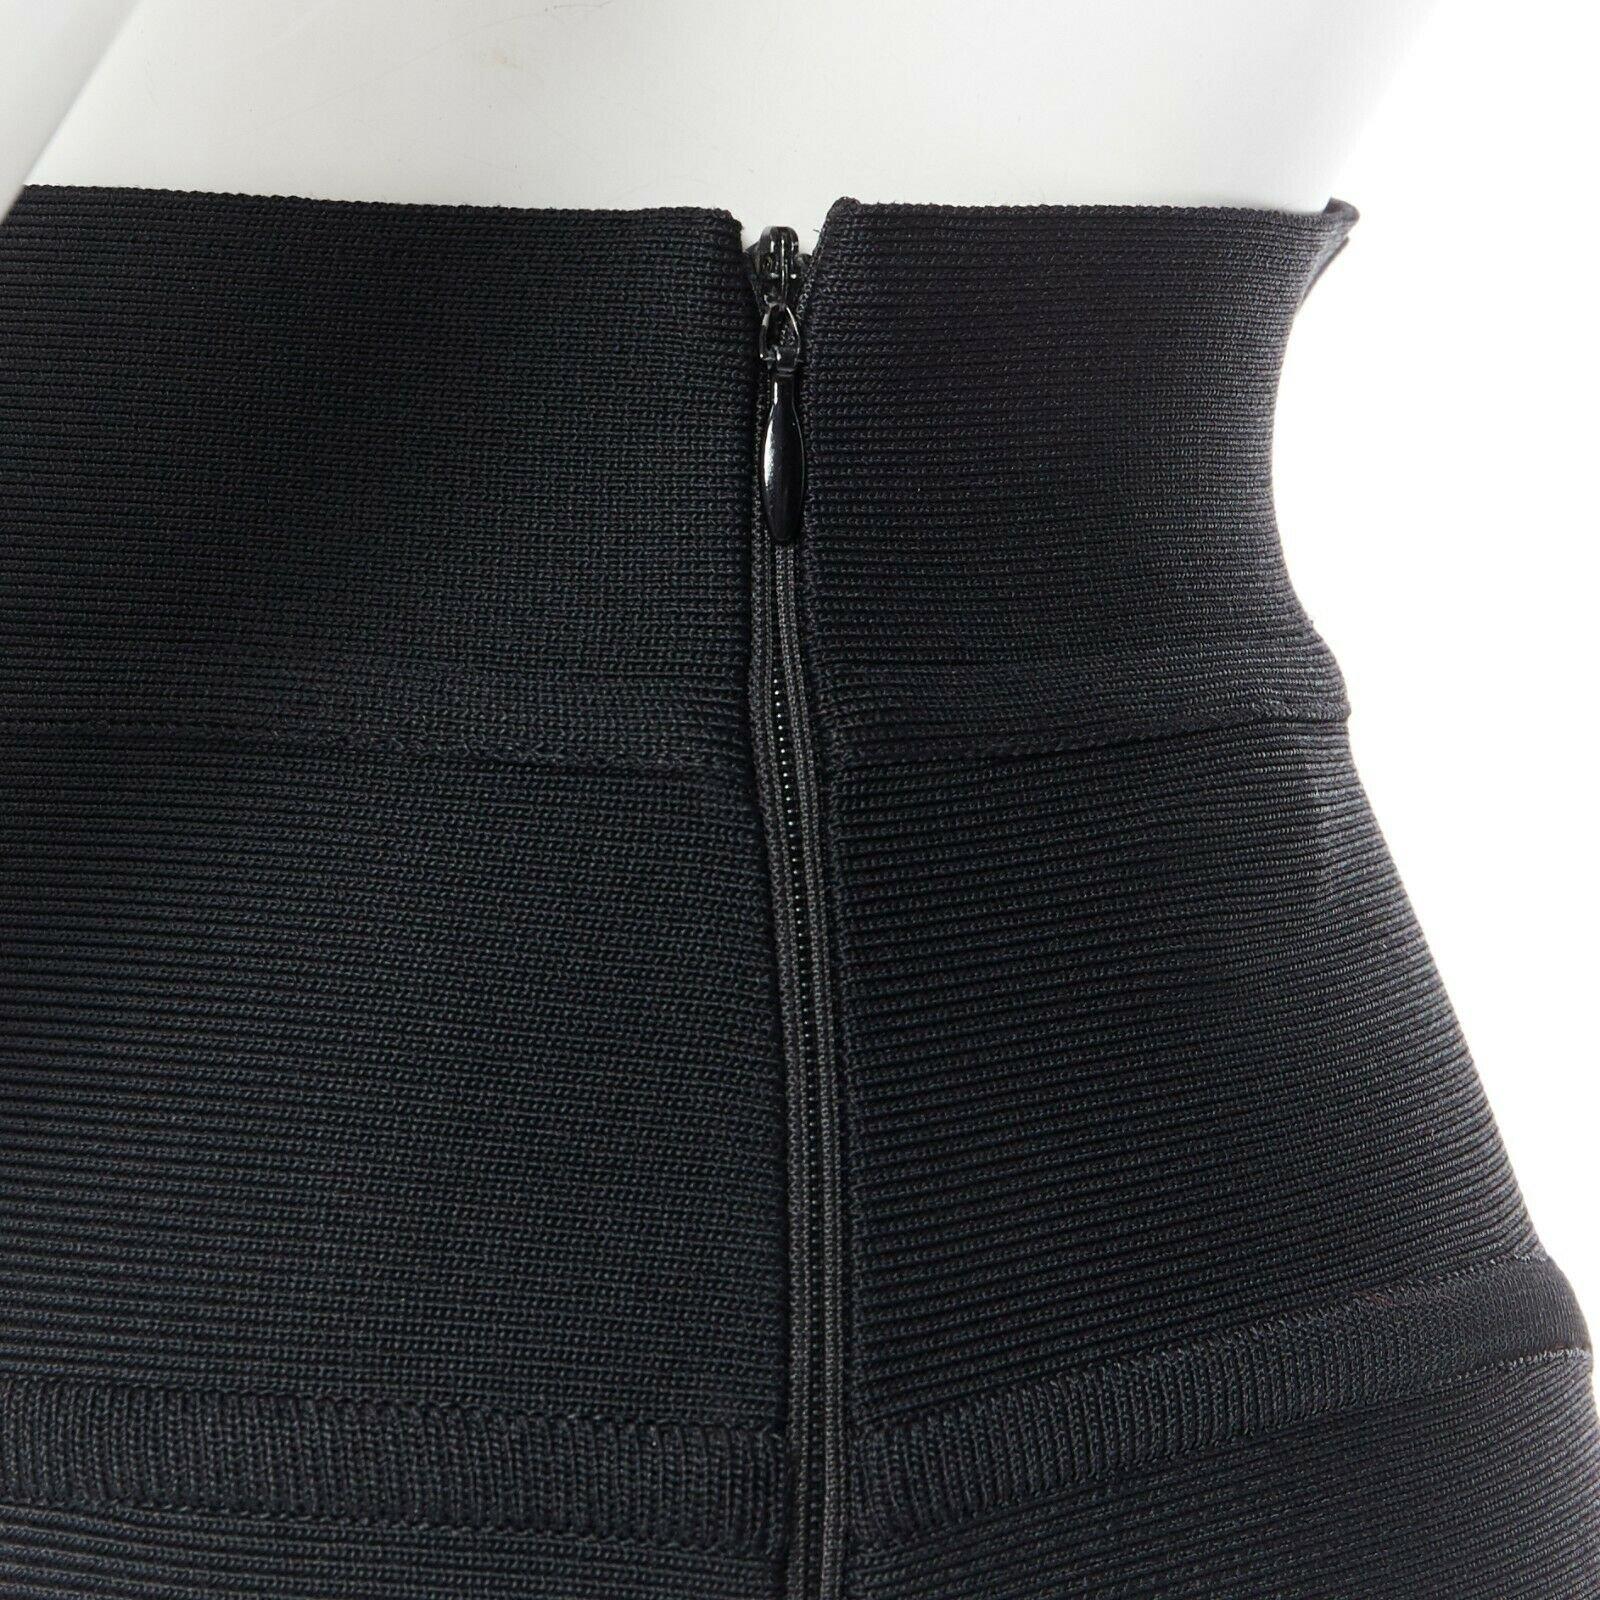 HERVE LEGER PARIS black body-conscious stretchable piping bandage pencil skirt S For Sale 2